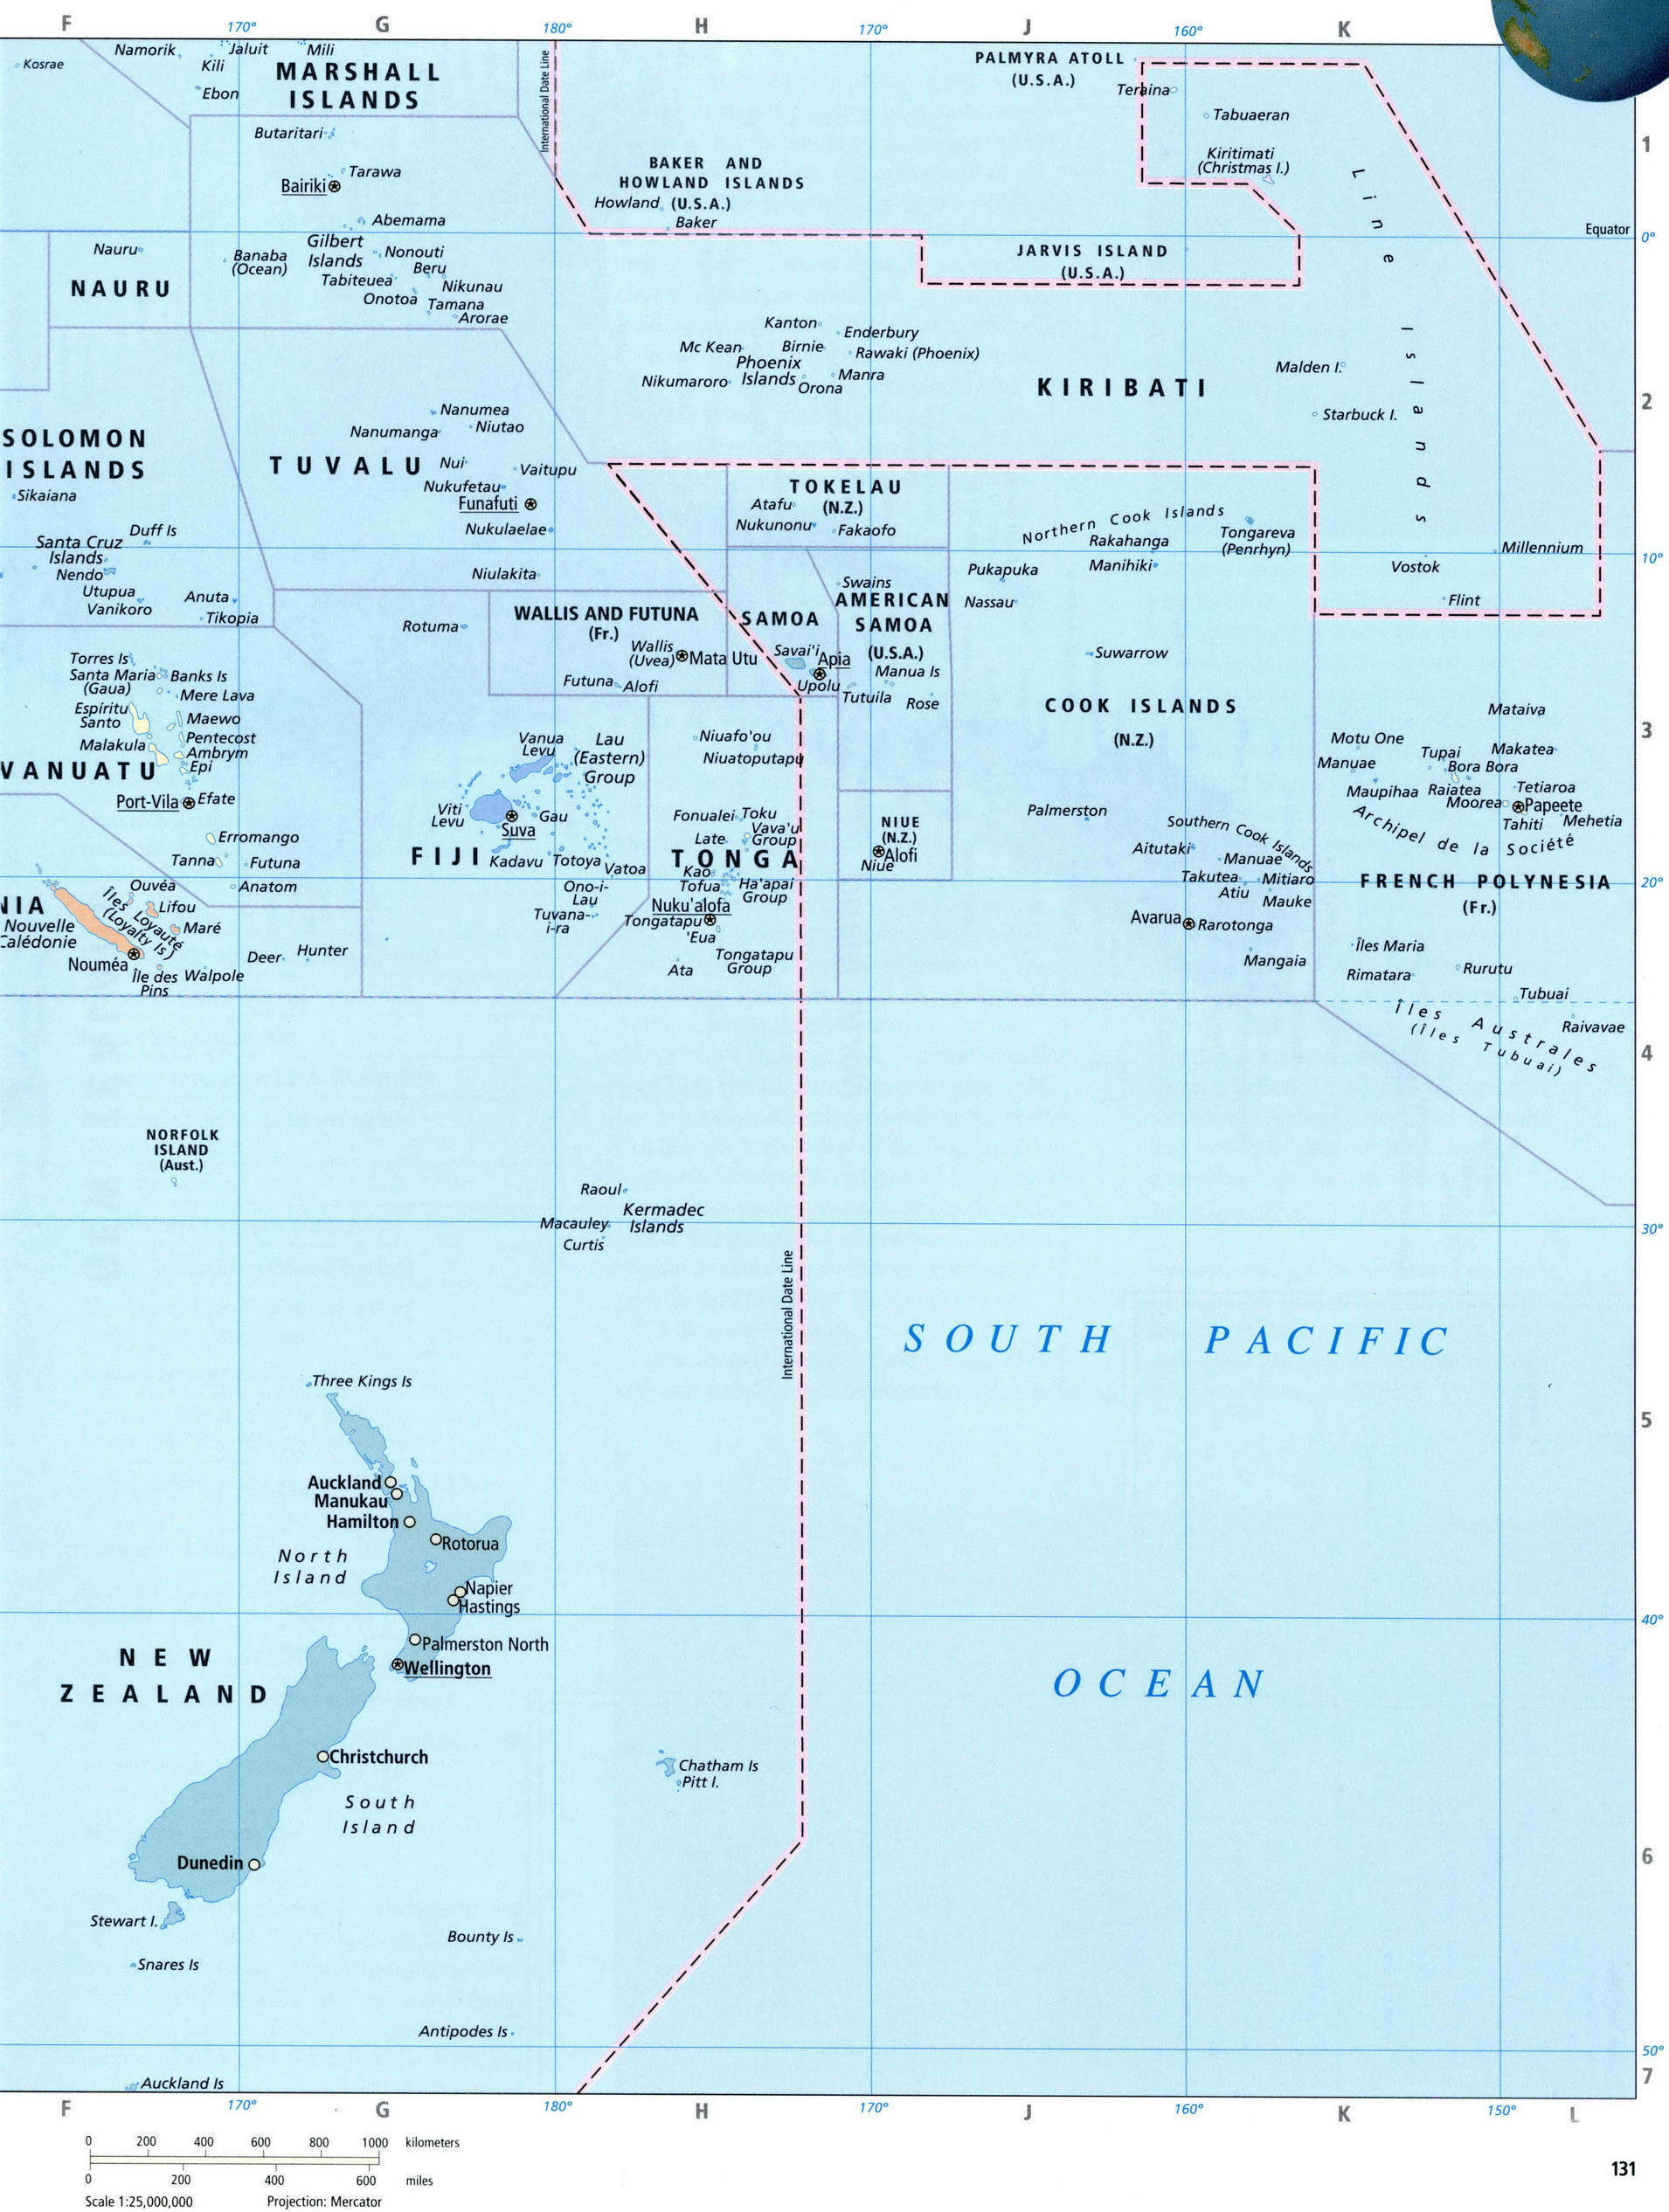 Detailed political map of Australia and Oceania